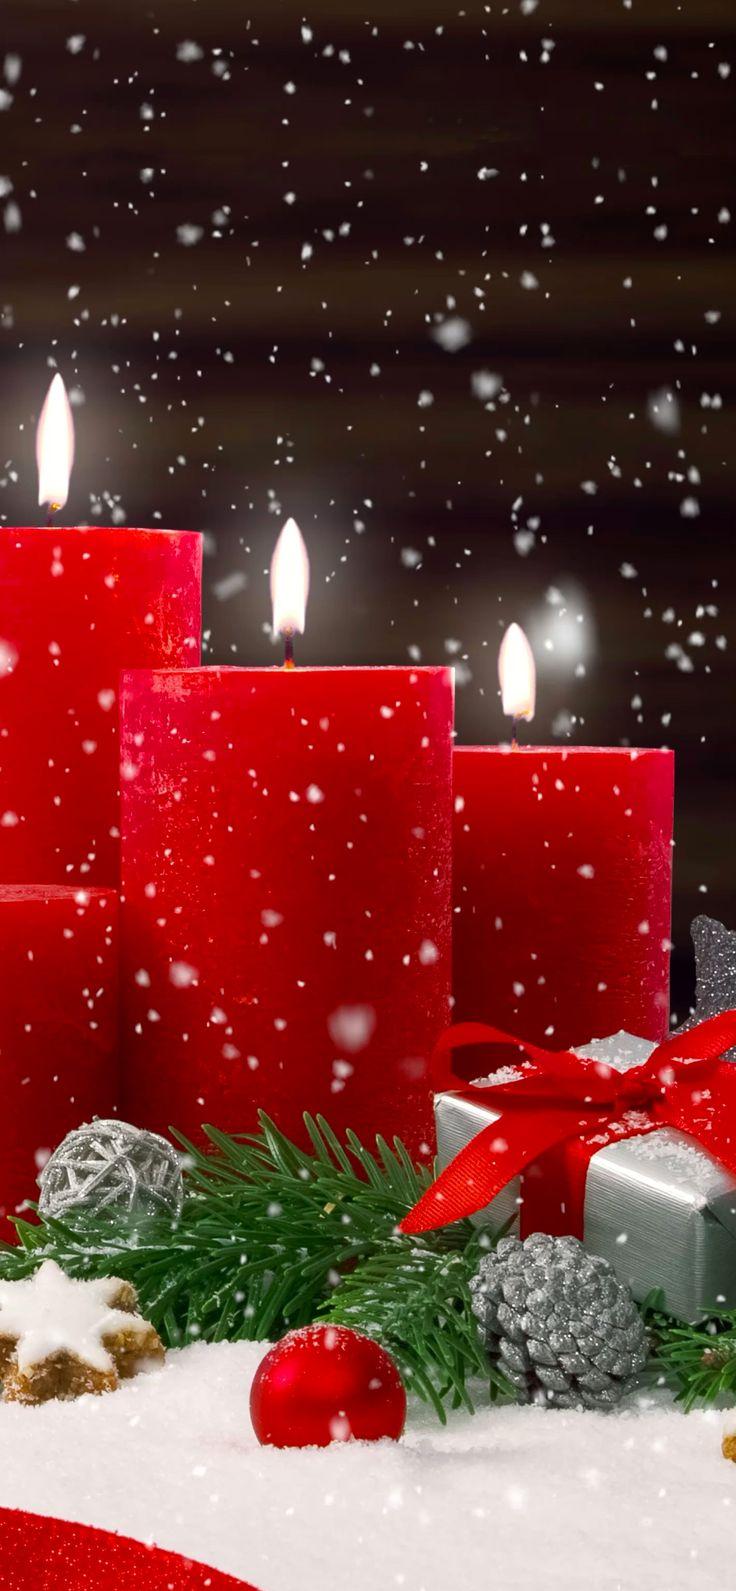 Christmas Candles Live Wallpaper Android